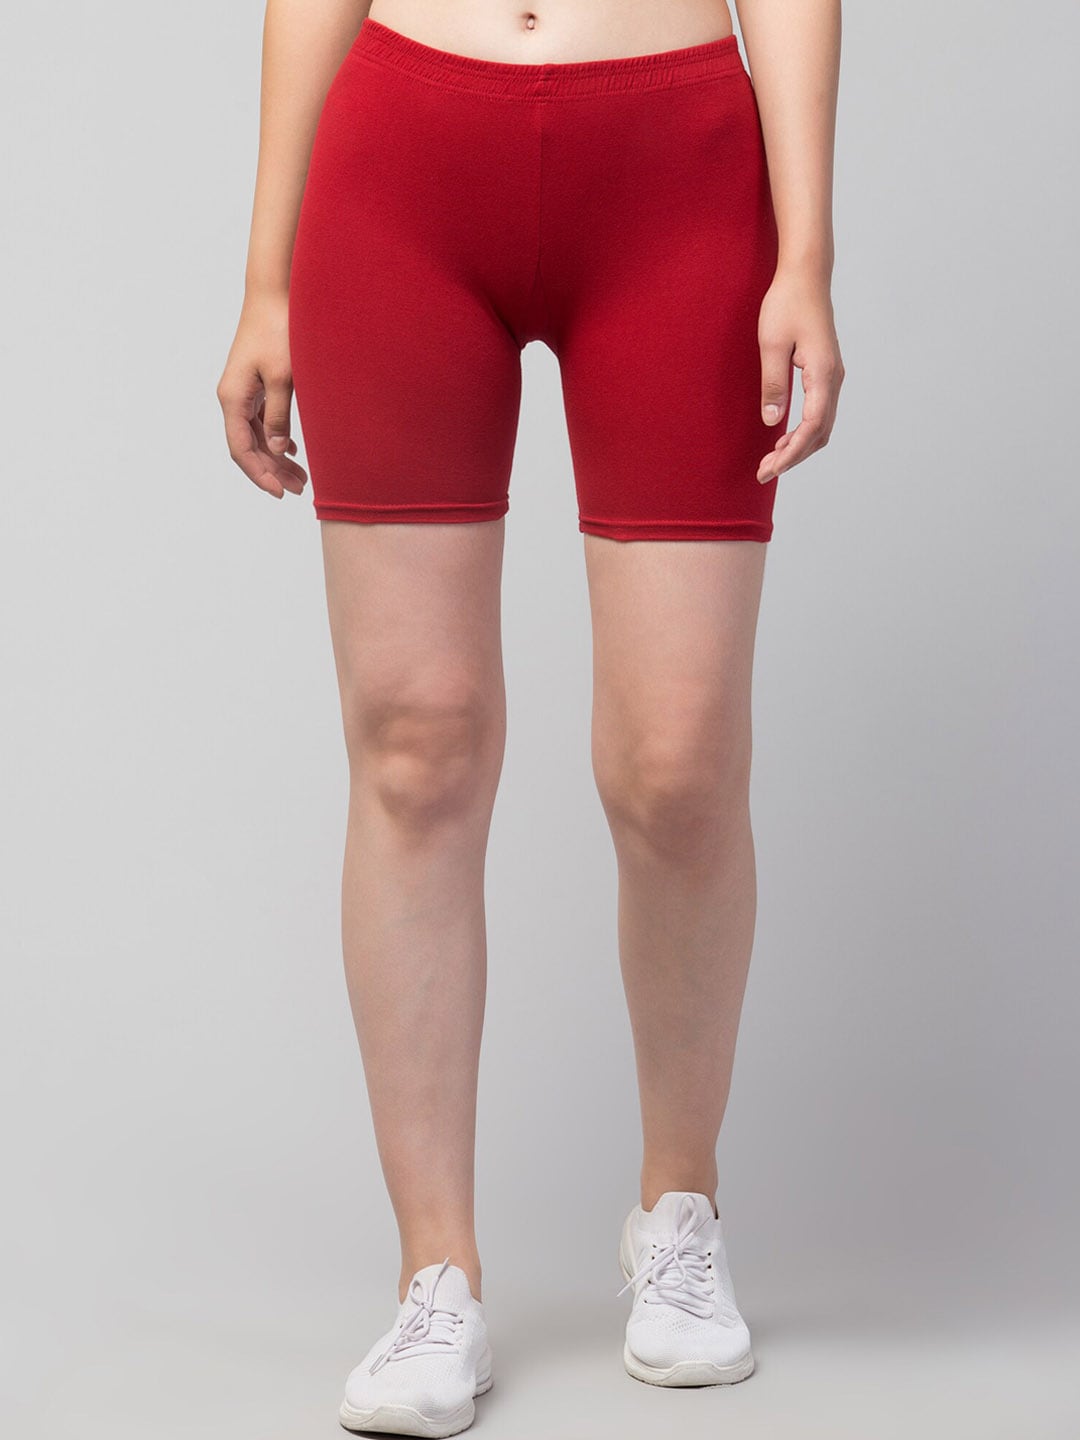 Apraa & Parma Women Maroon Cycling Sports Shorts Price in India